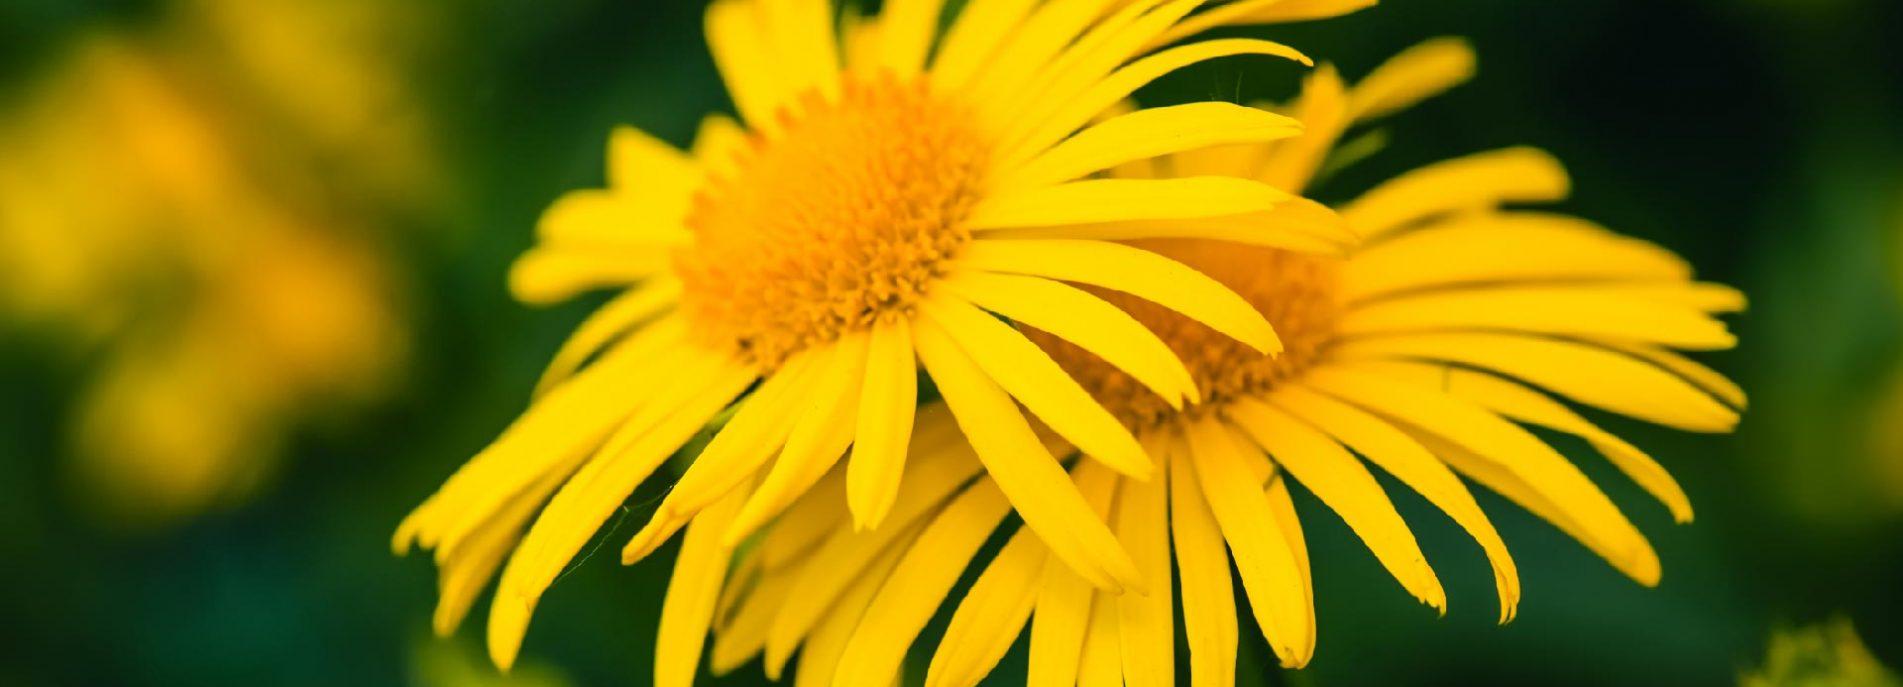 Arnica: Benefits, Uses, and Side Effects